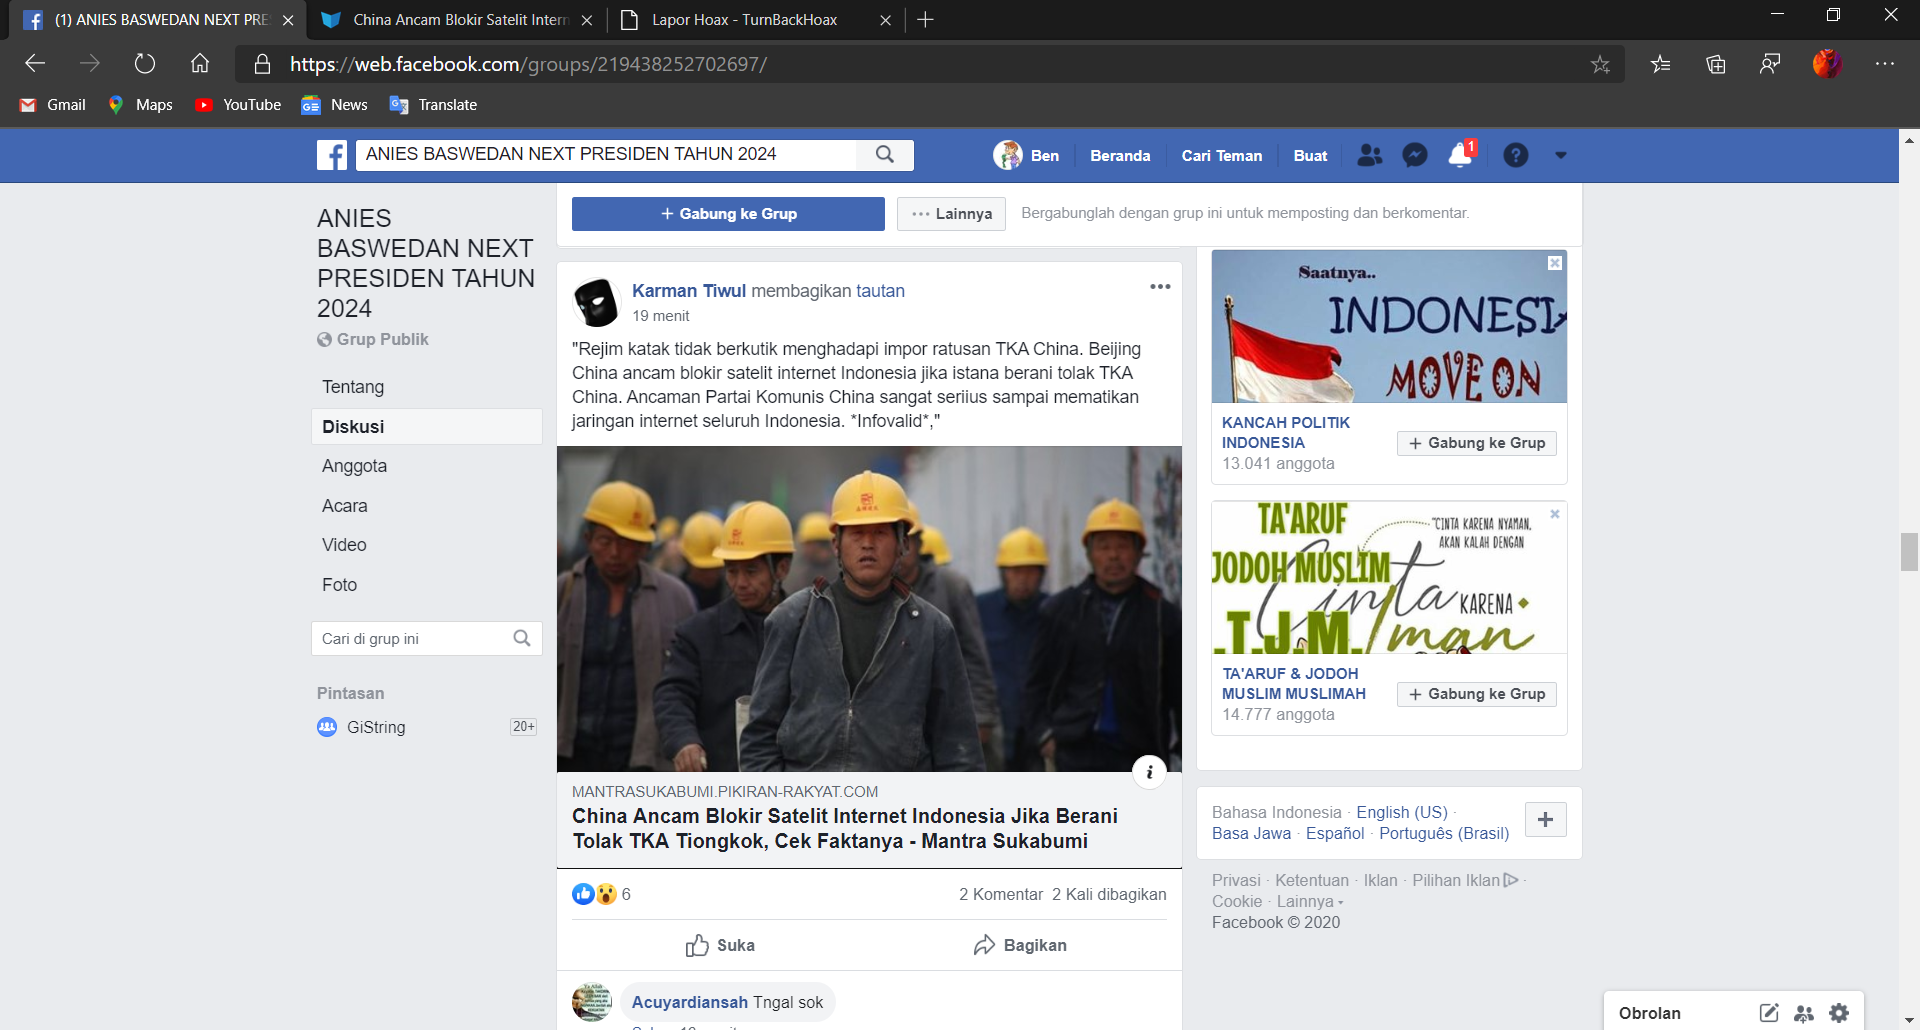 ANIES BASWEDAN NEXT PRESIDEN TAHUN 2024 and 1 more page - Personal - Microsoft​ Edge 10_05_2020 14_52_54.png